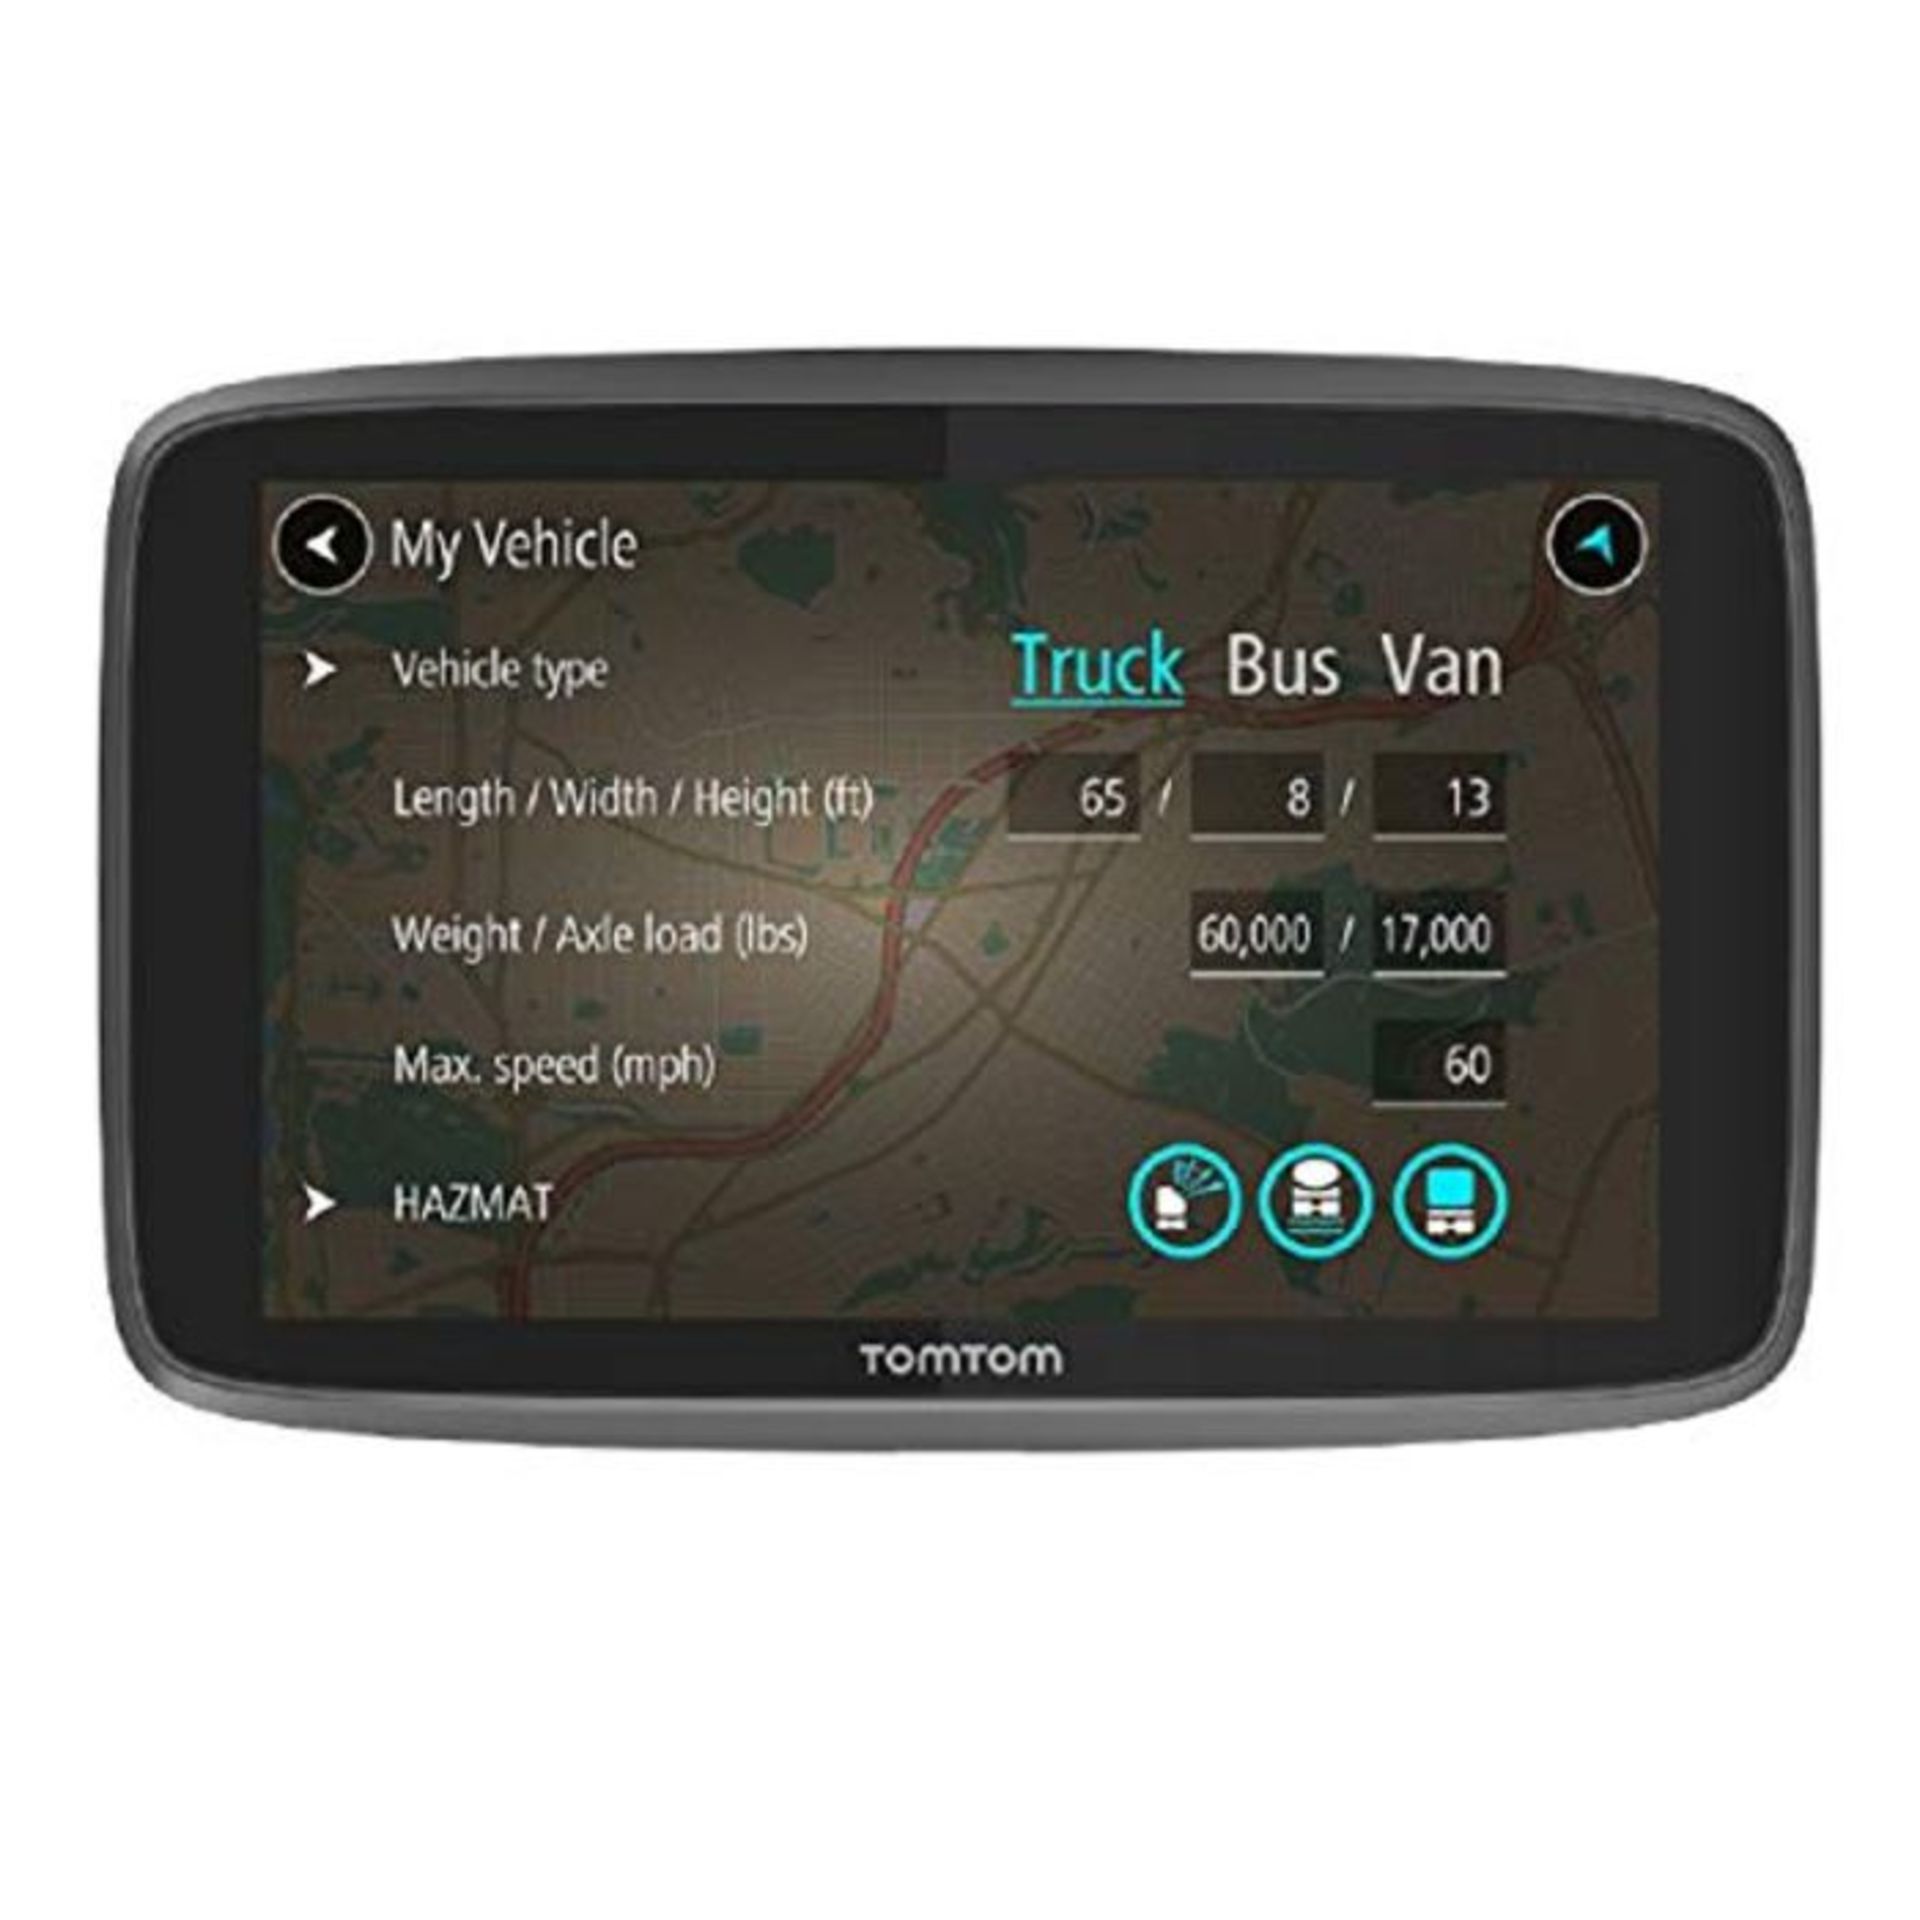 RRP £389.00 TomTom Truck Sat Nav GO Professional 6250 with European Maps and Traffic Services (Via